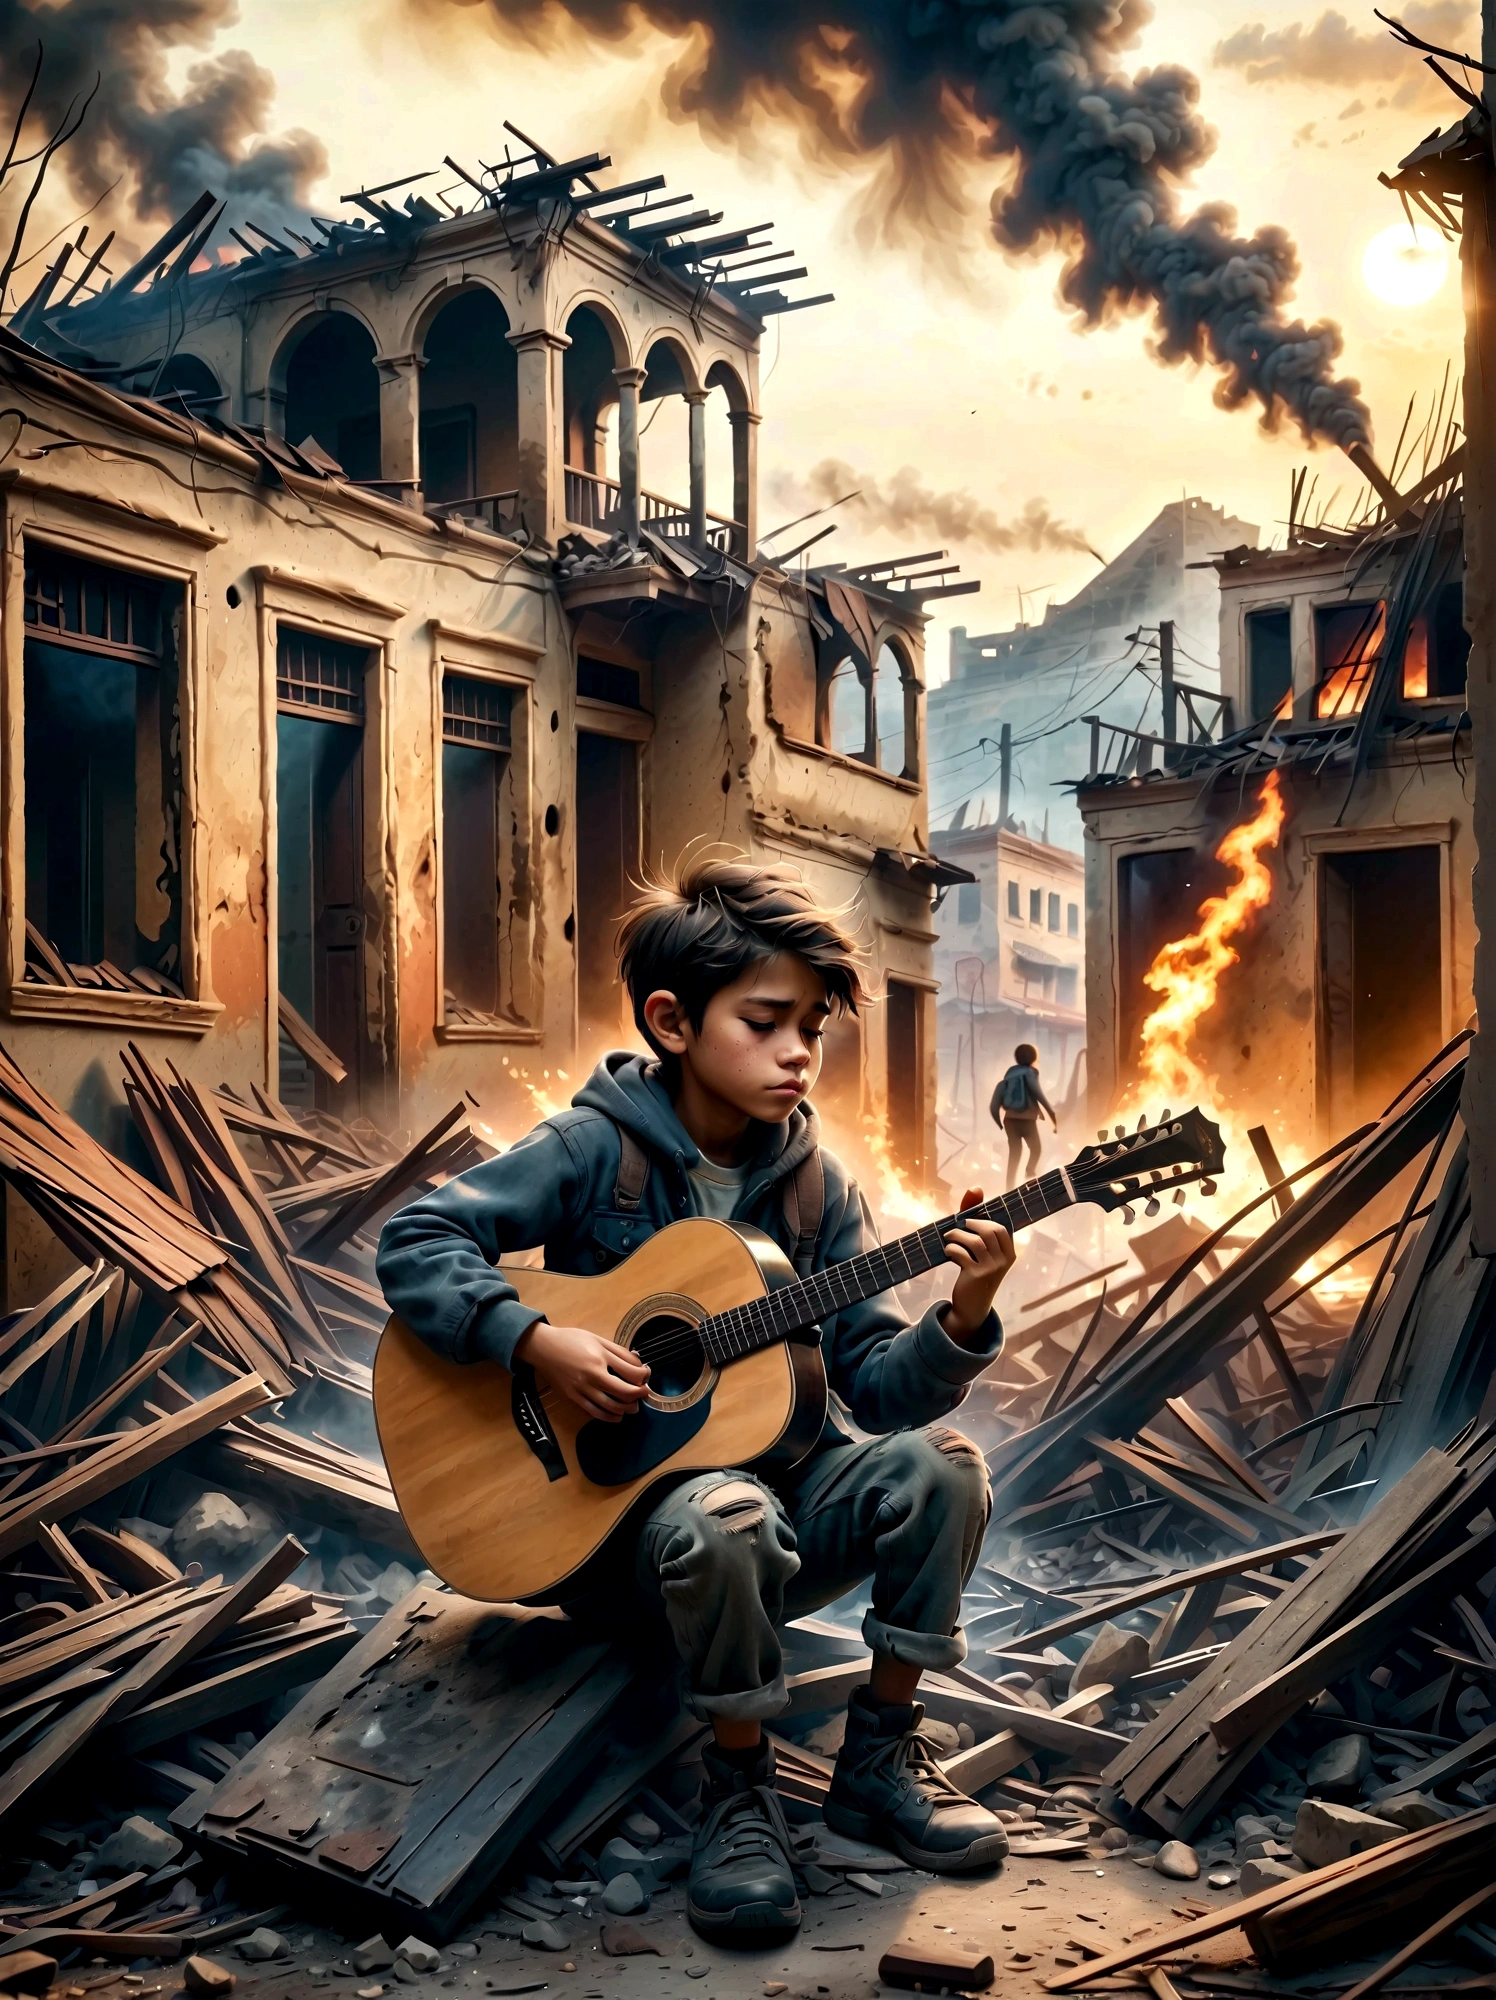 In the midst of a war-torn, smoky ruin, a  child is playing a guitar. The scene captures the stark contrast between the devastation of the surroundings and the innocence of the . The ruins are filled with debris and remnants of buildings, with smoke and fire in the background. The child's expression is somber, reflecting the harsh reality of the situation. The overall mood is poignant and emotional, with muted colors and dramatic lighting to emphasize the desolation and the glimmer of hope represented by the music.